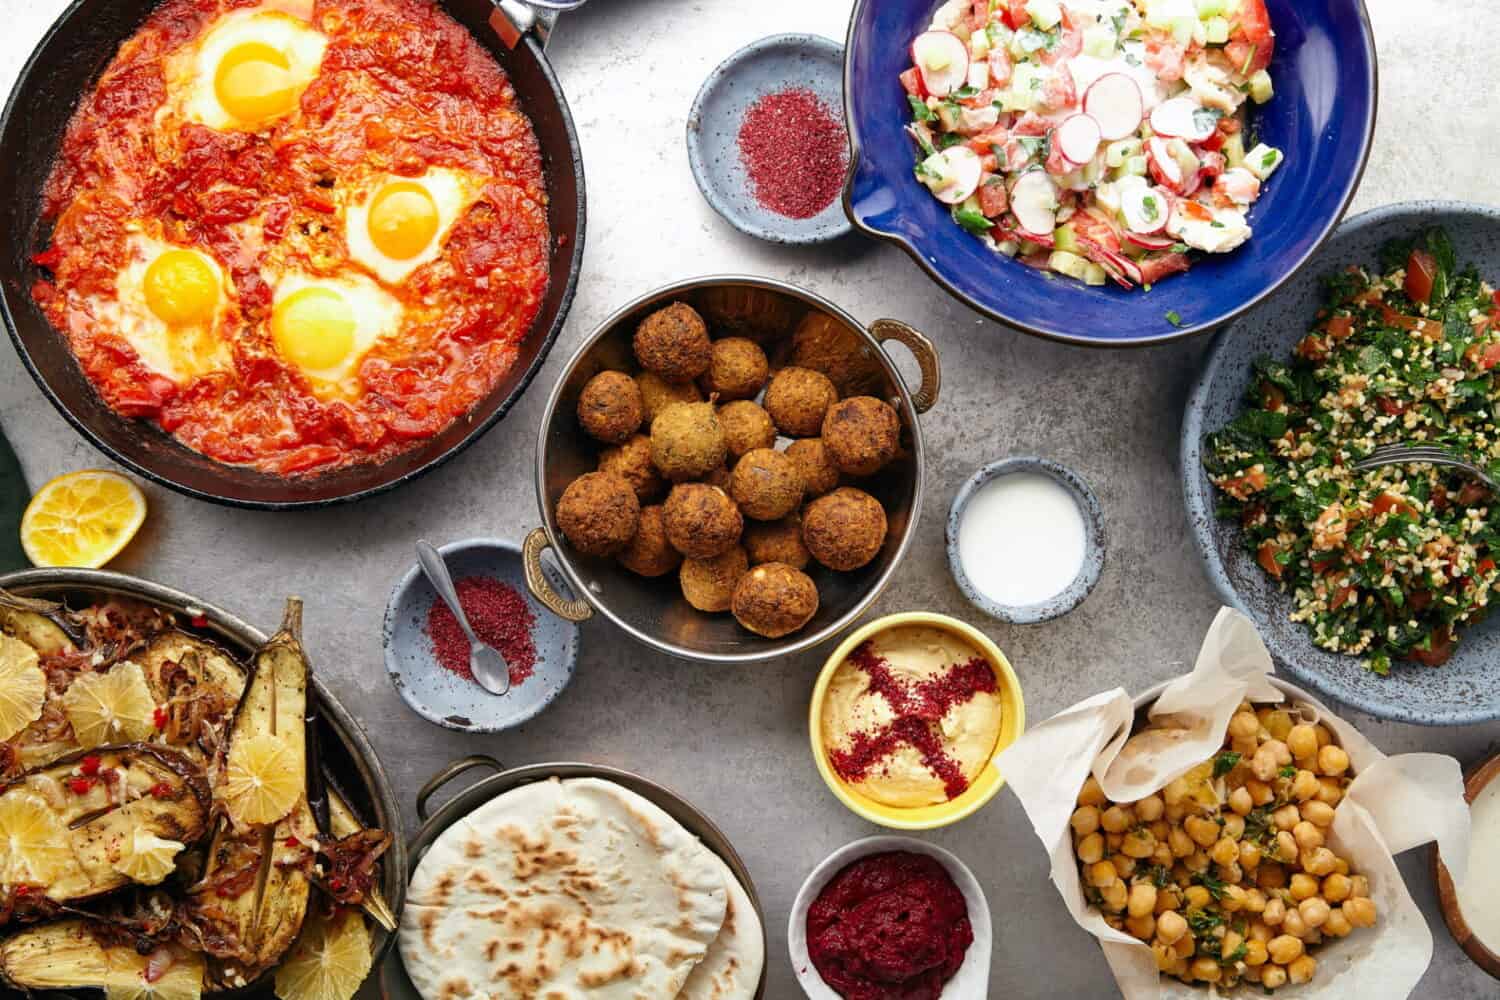 Cuisine and Entertainment in Israel